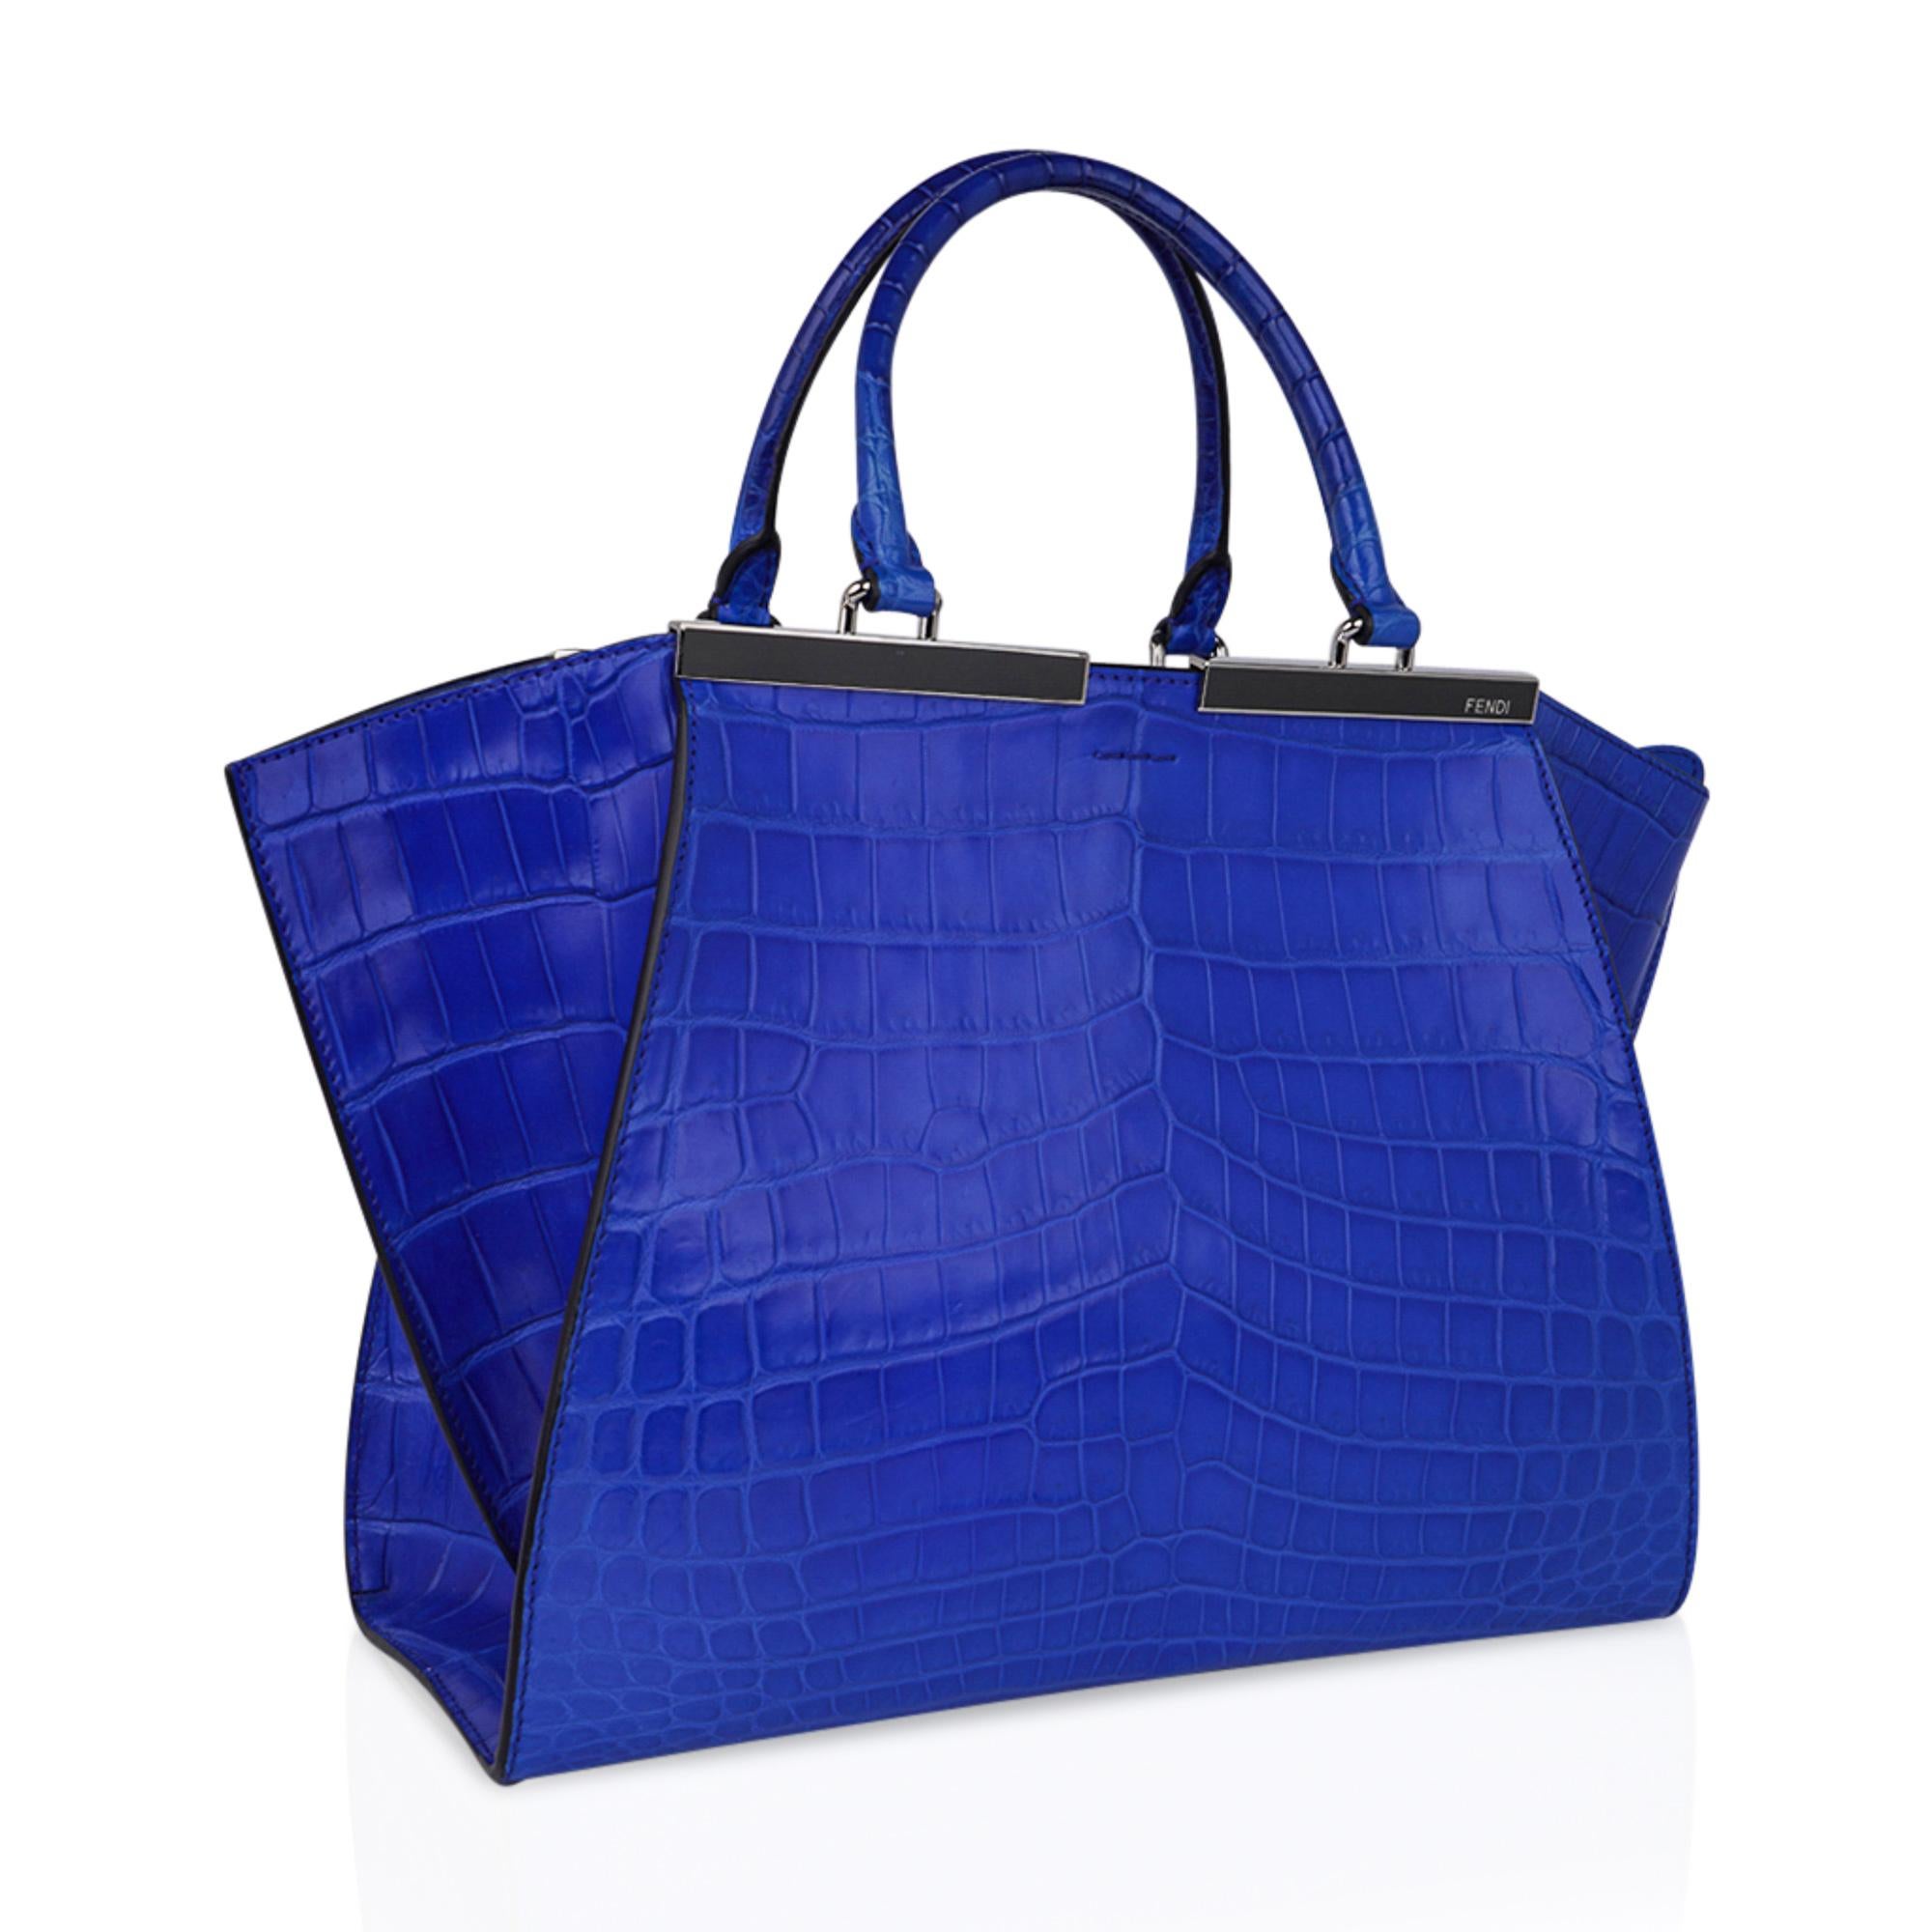 Mightychic offers a Fendi 3Jours Medium Blue Matte Crocodile Bag.
A rich and striking electric Blue matte crocodile tote with silver toned hardware.
Double handle with top zip closure.
Bag comes with a Blue matte crocodile clochette housing a silver